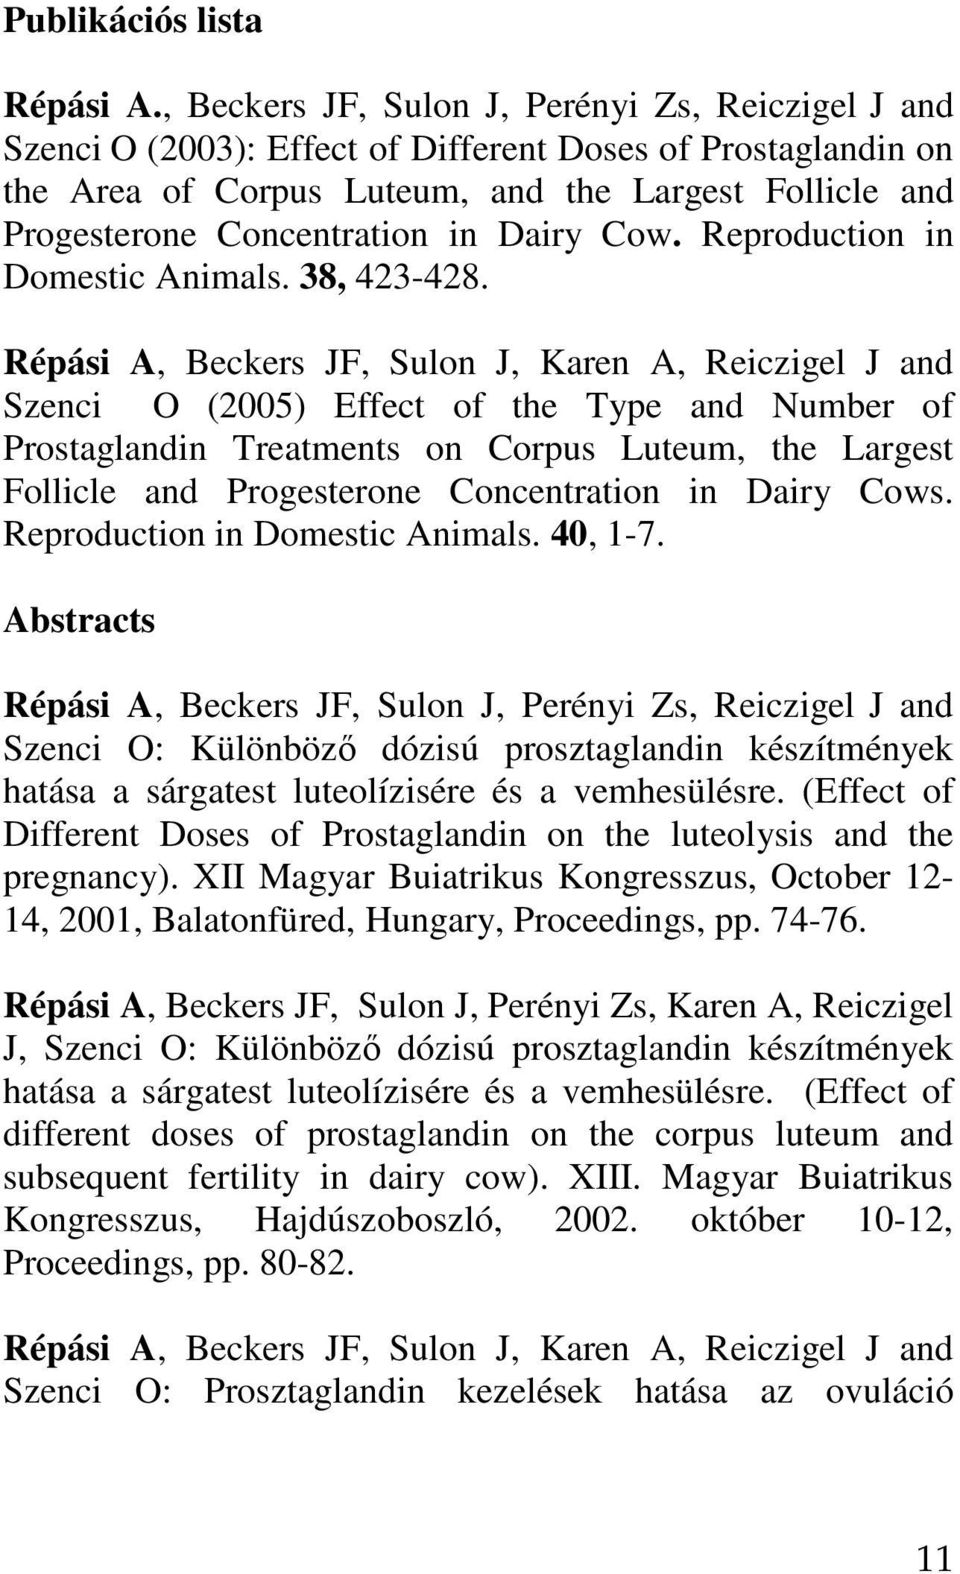 Dairy Cow. Reproduction in Domestic Animals. 38, 423-428.